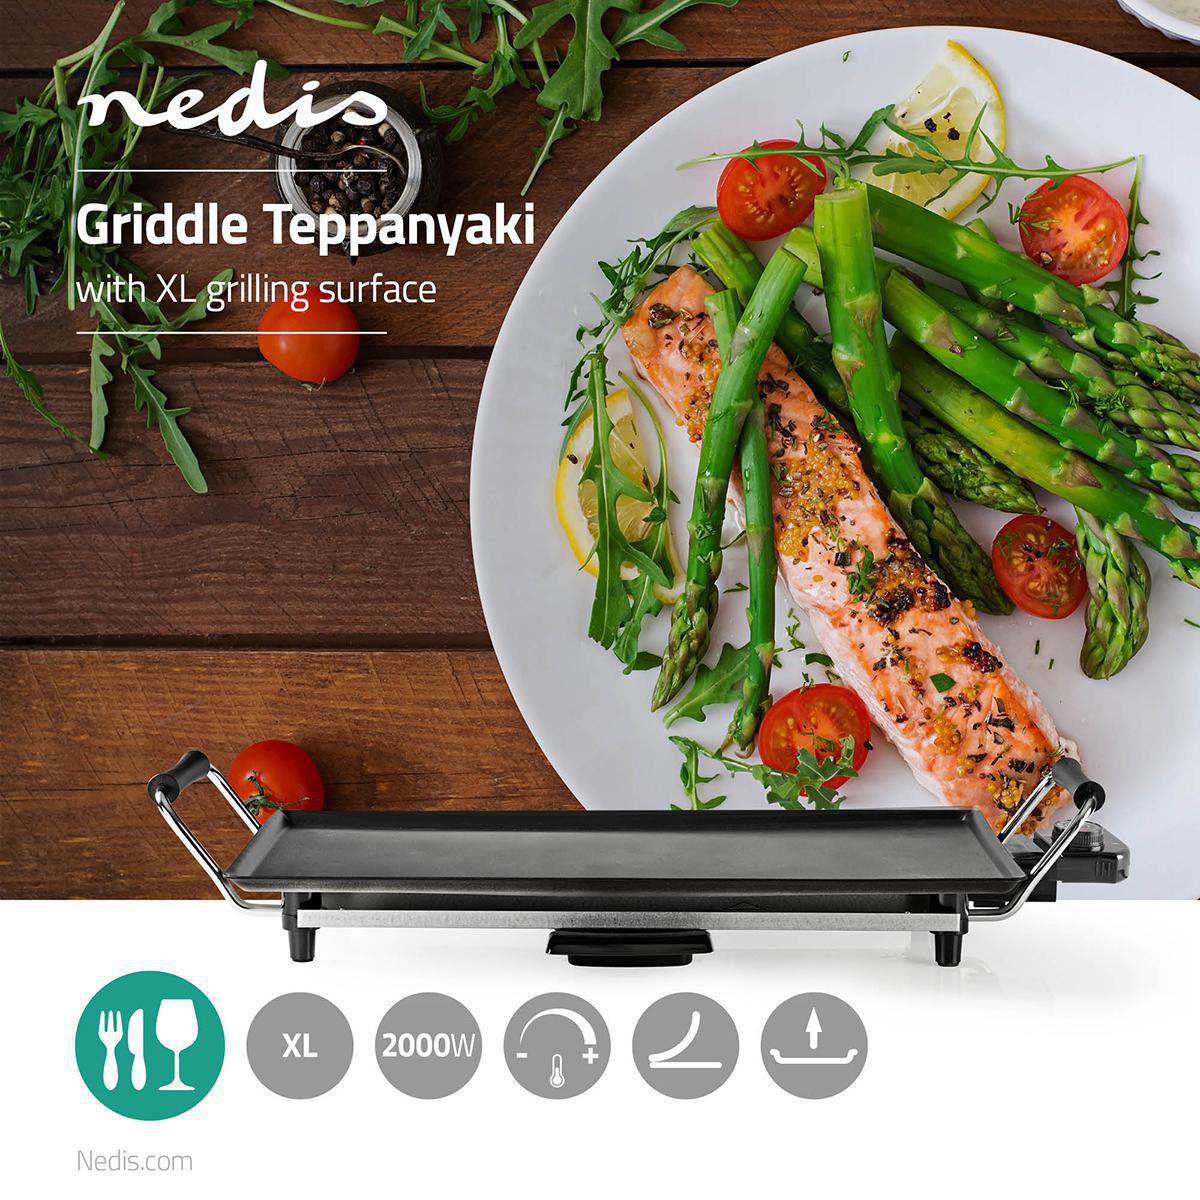 Griddle Grill Cooking Teppanyaki Nedis